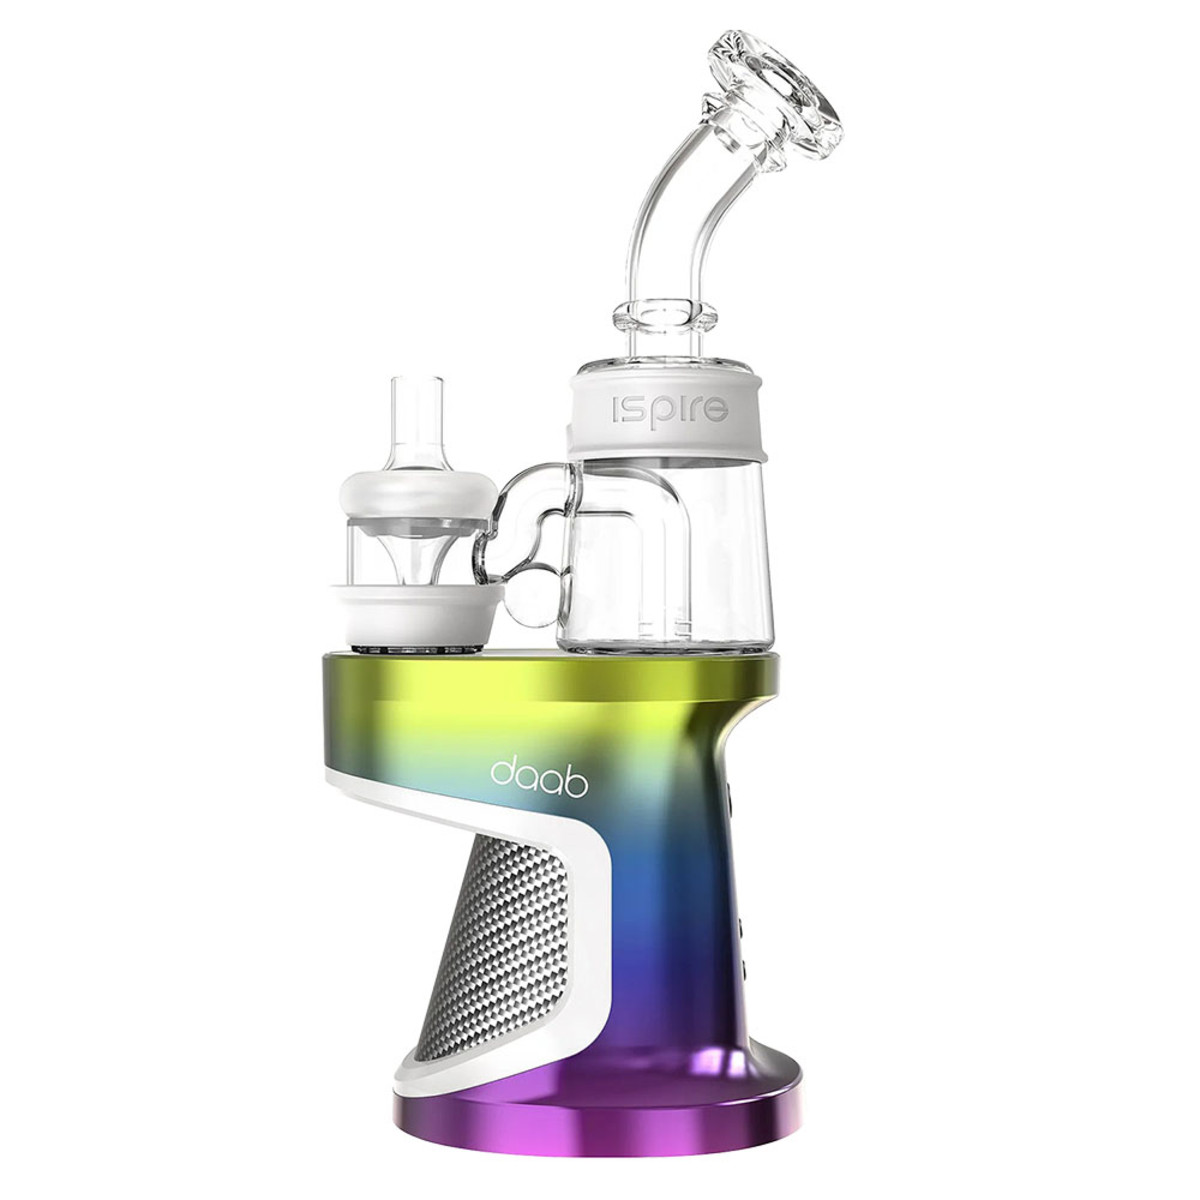 Ispire Daab Northern Lights Limited Edition Electronic Dab Rig